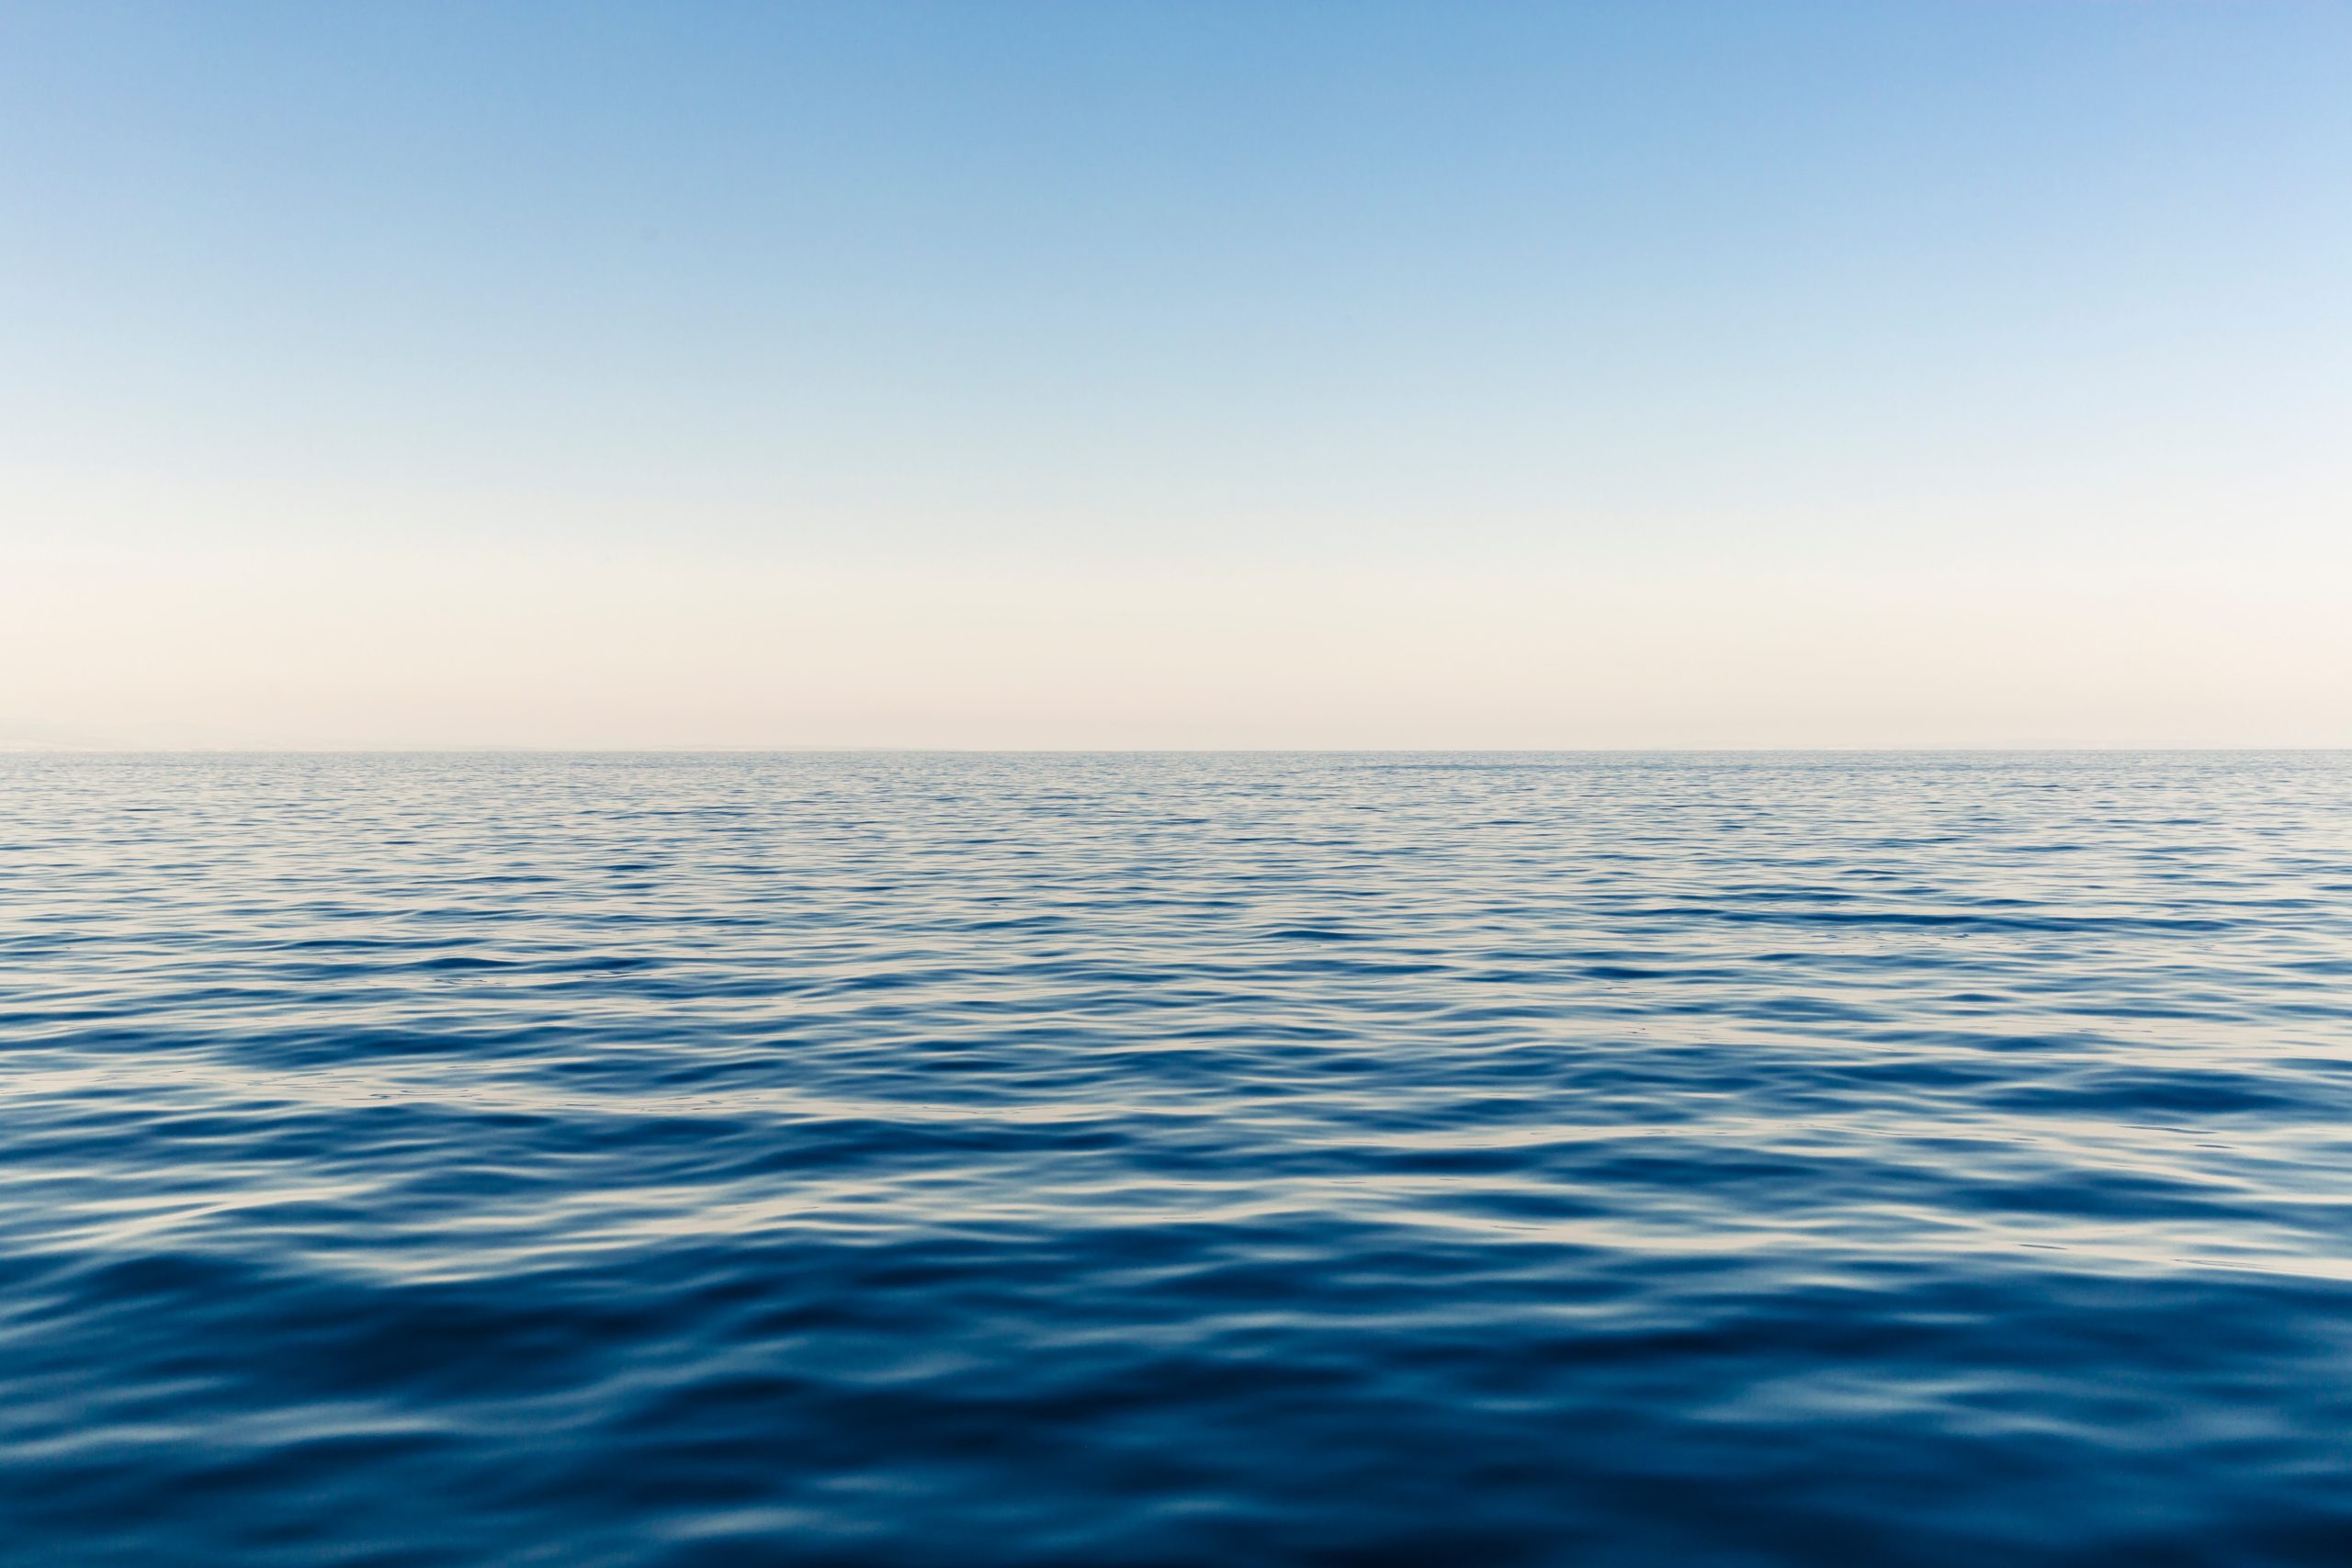 An expanse of water can be seen stretching straight all the way back to the horizon.